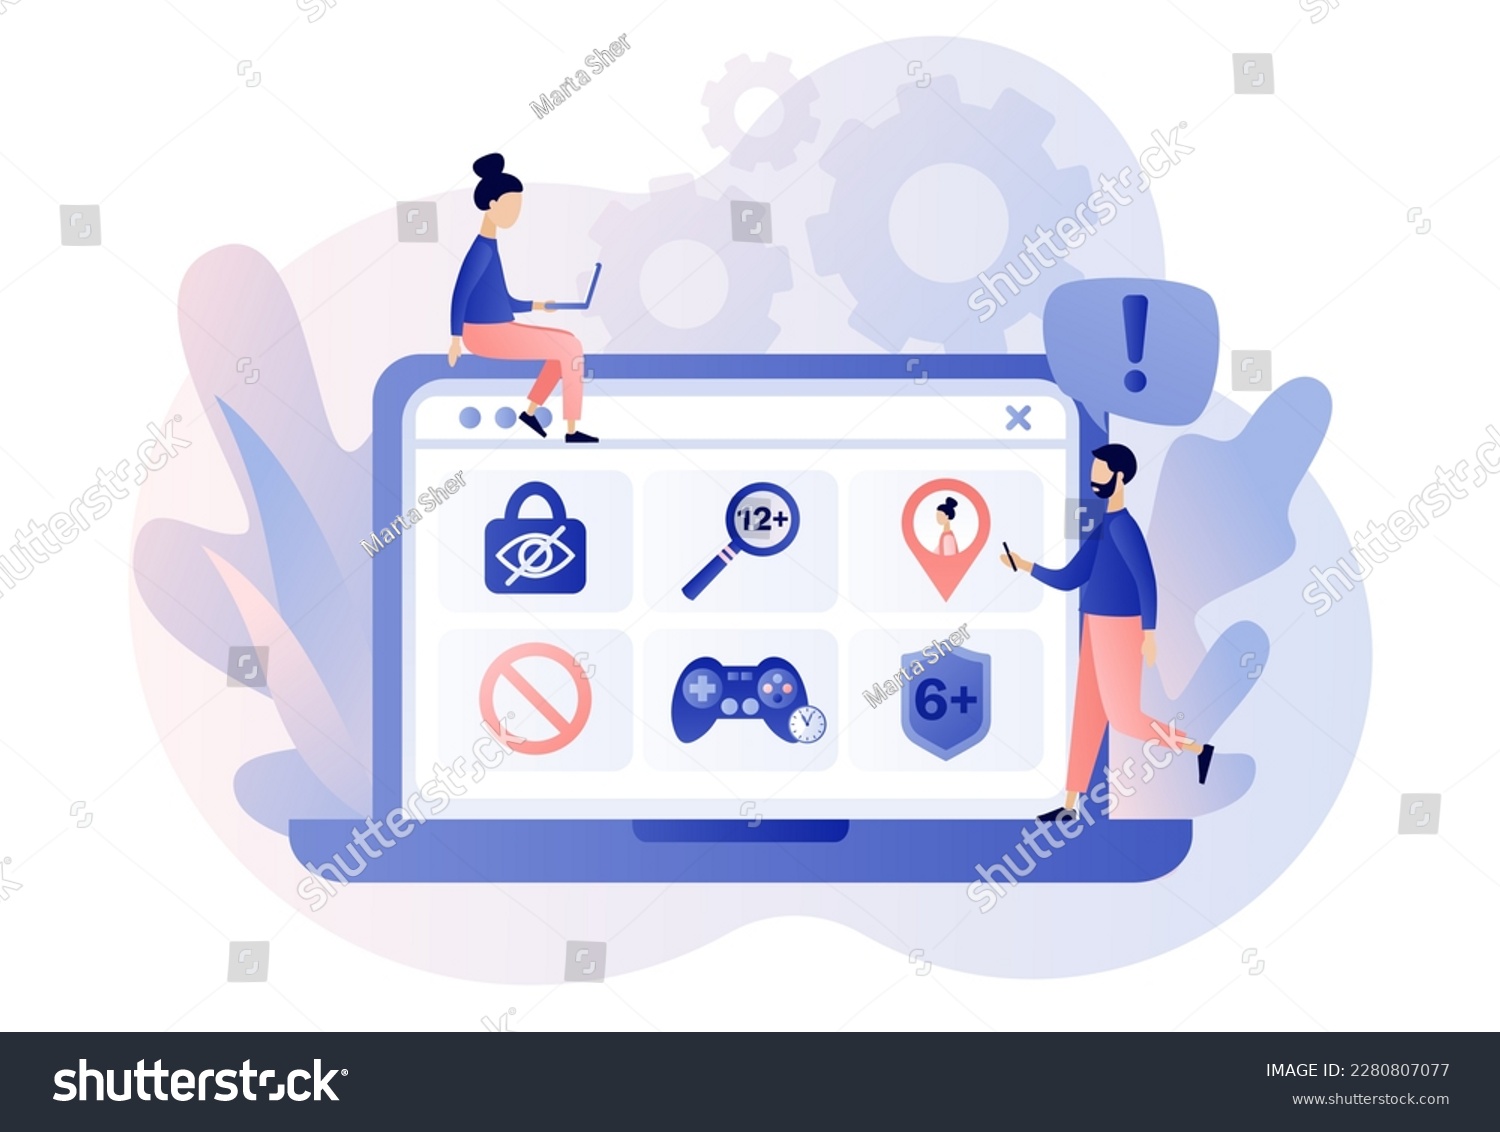 SVG of Parental control software. Blocked, prohibited or inappropriate content for kids. Safe internet. Age restriction, limited game time, geolocation tracking. Modern flat cartoon style Vector illustration svg